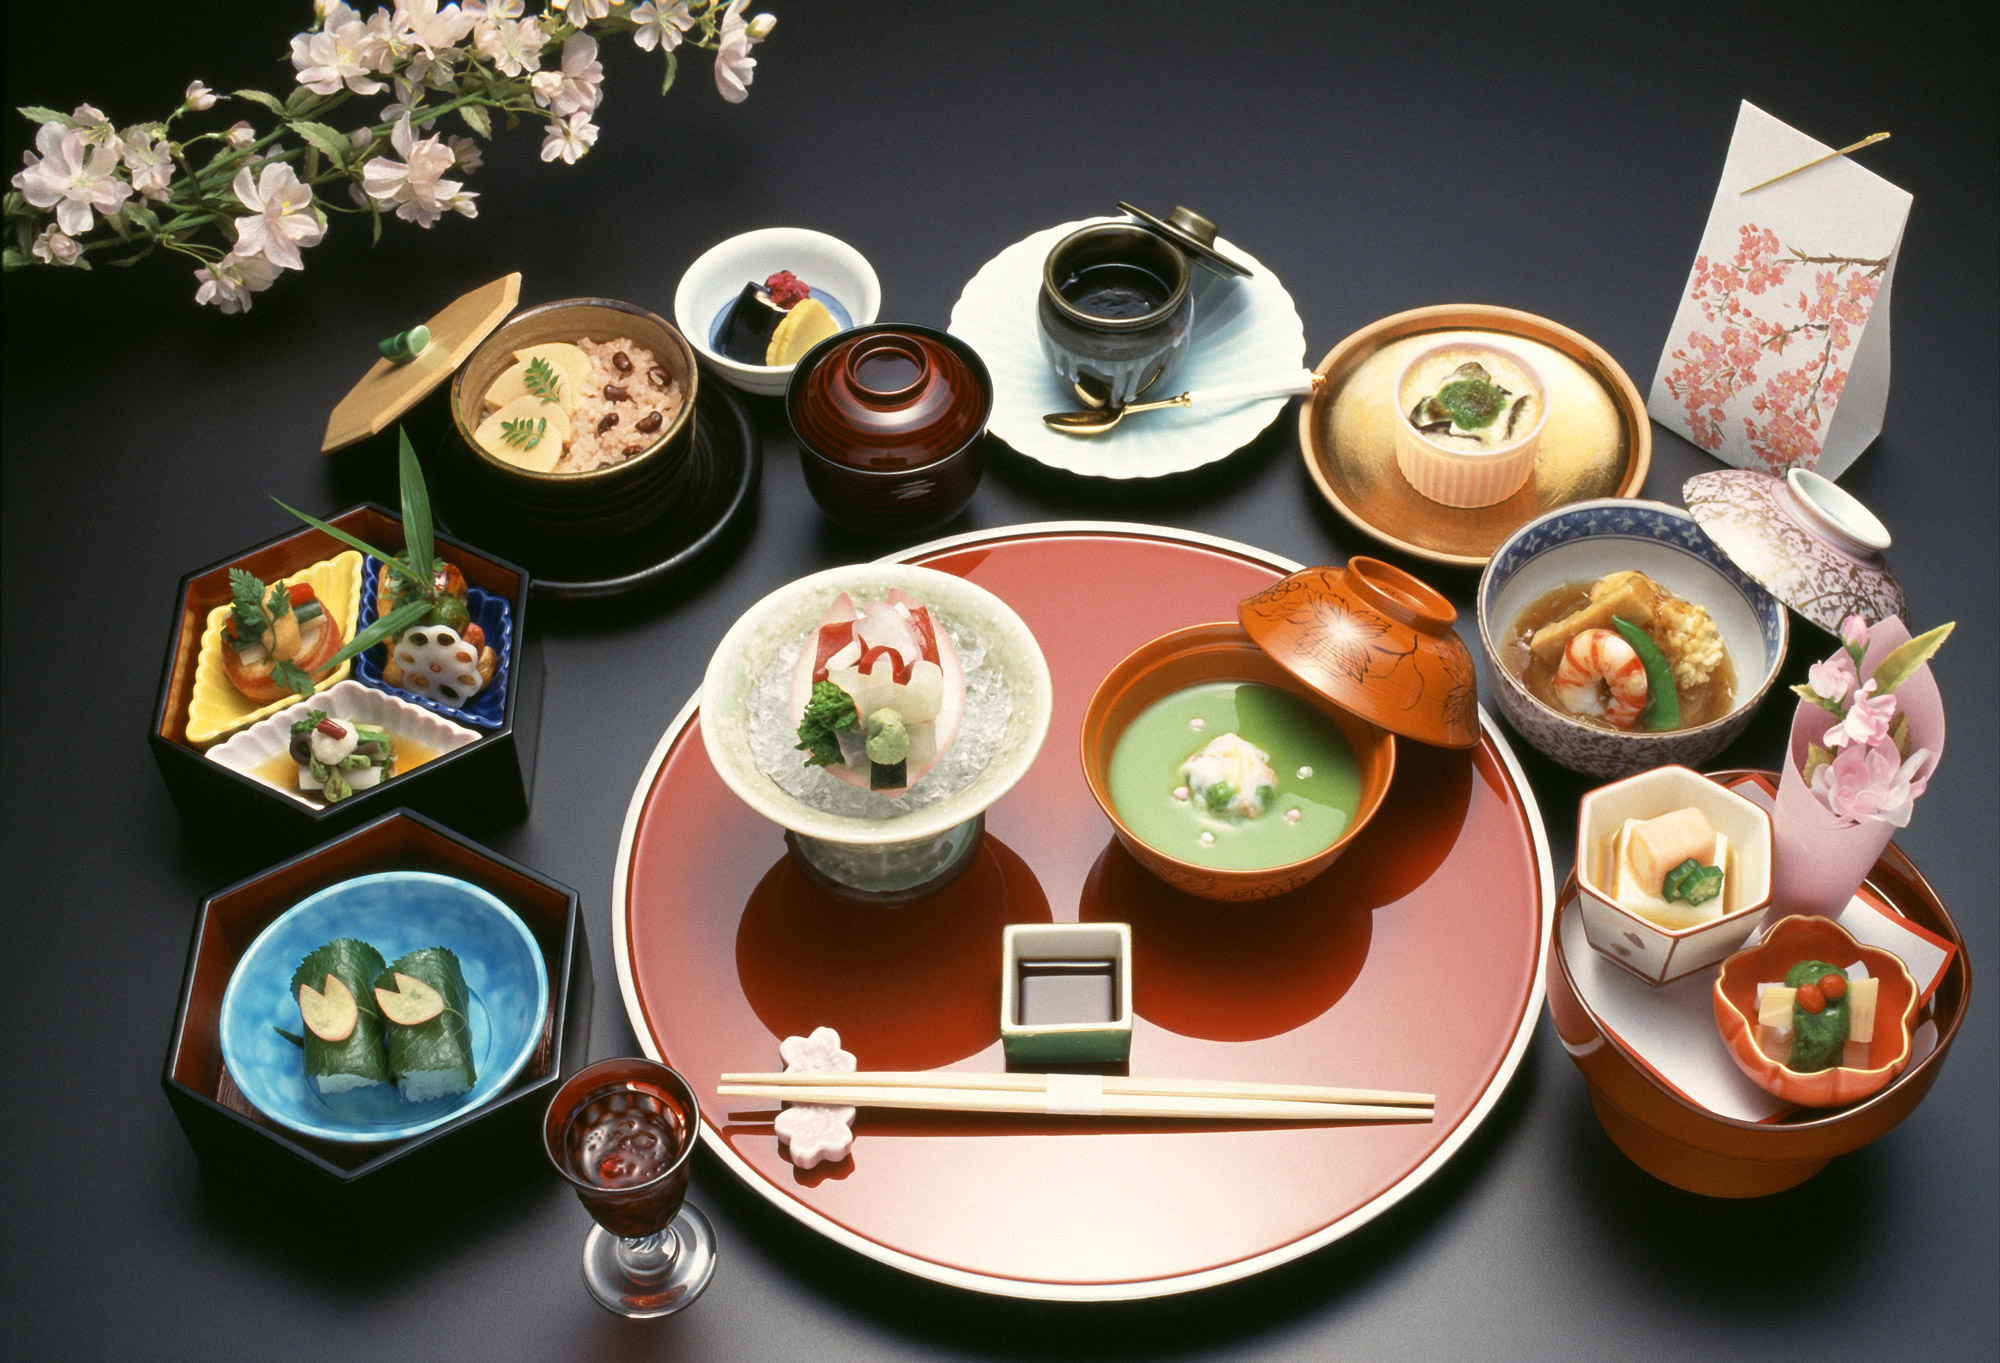 Plates and bowls arranged in the Japanese style